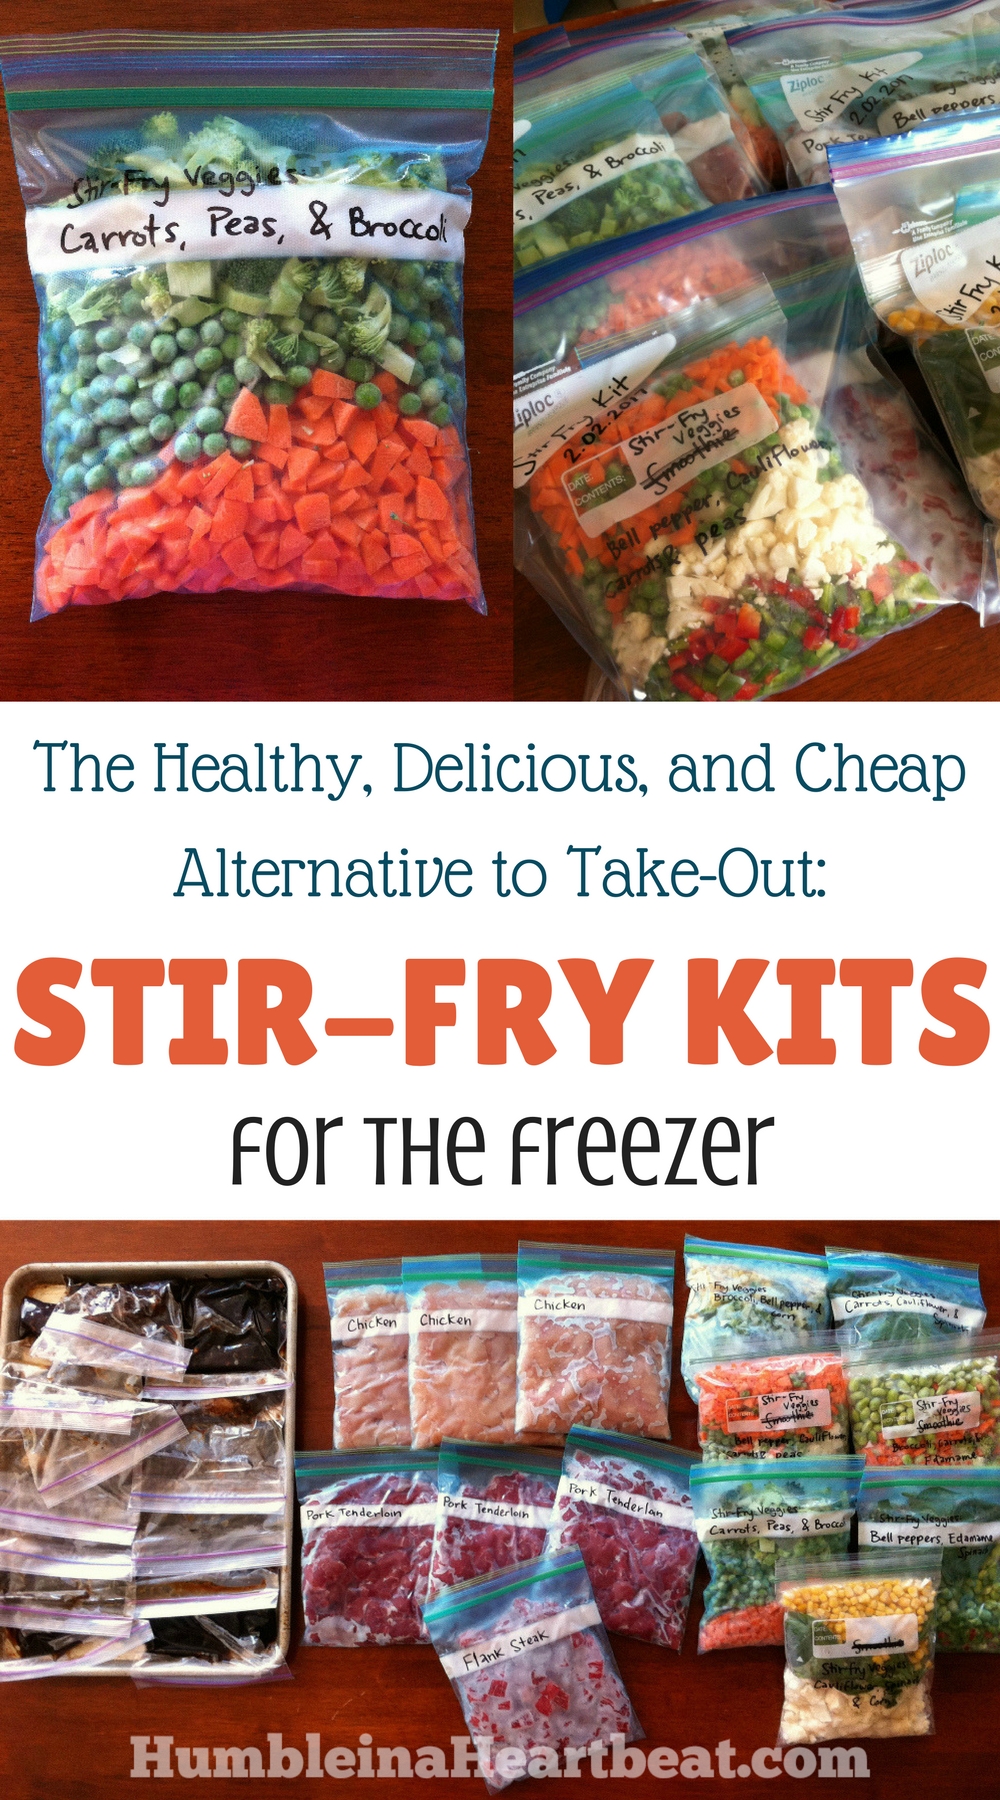 Save time and money by making these freezer stir-fry kits. There's nothing like having a healthy meal just waiting in the freezer on an insanely busy day!